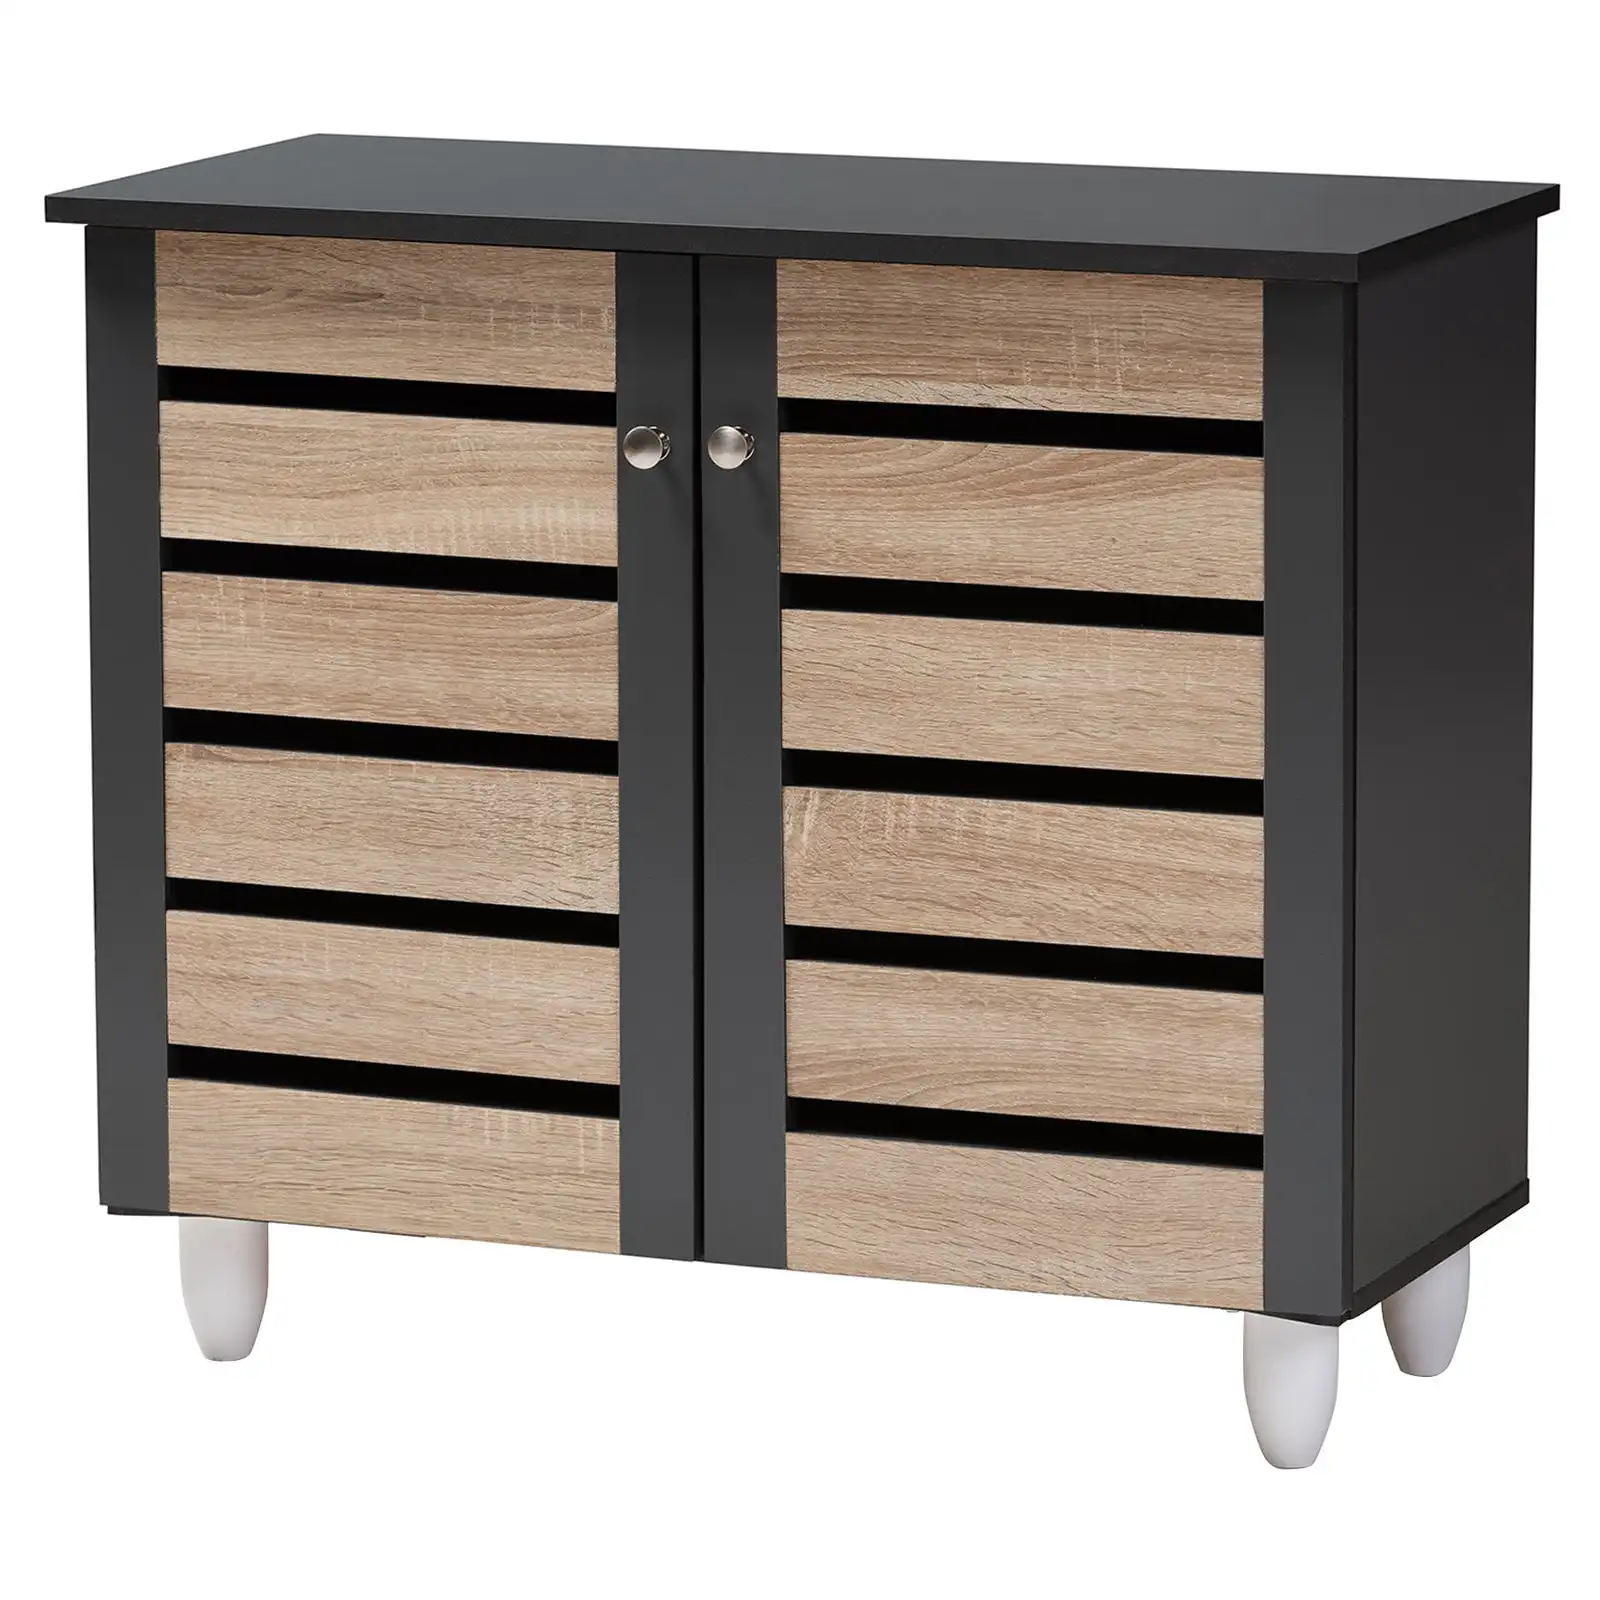 

Gisela Modern and Contemporary Two-tone Oak and Dark Gray 2-Door Shoe Storage Cabinet